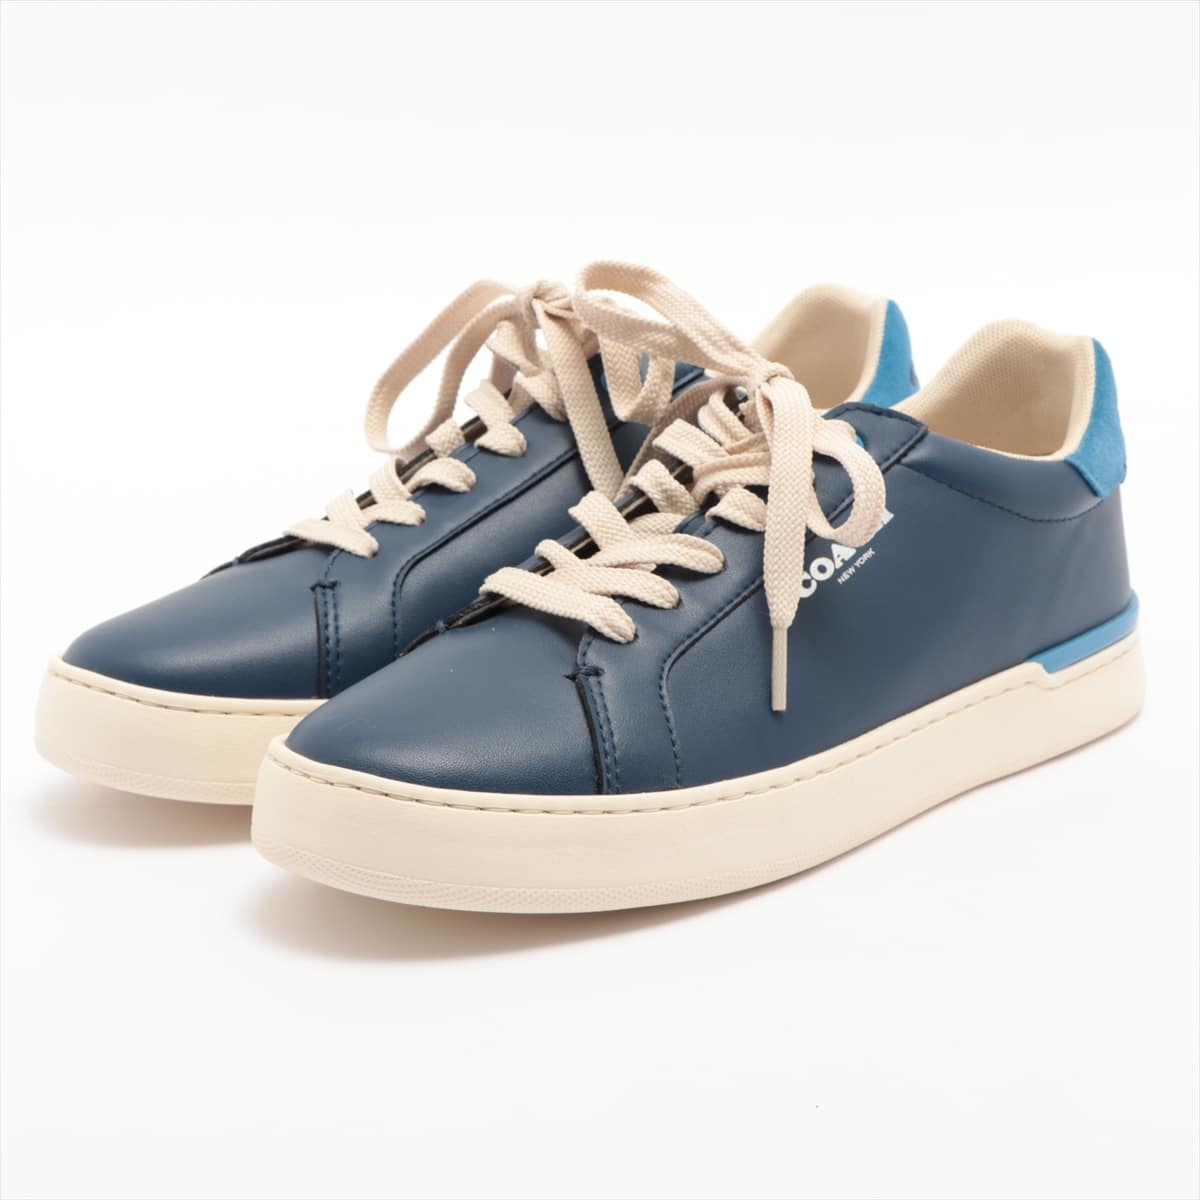 COACH Leather Sneakers 41 Men's Navy blue